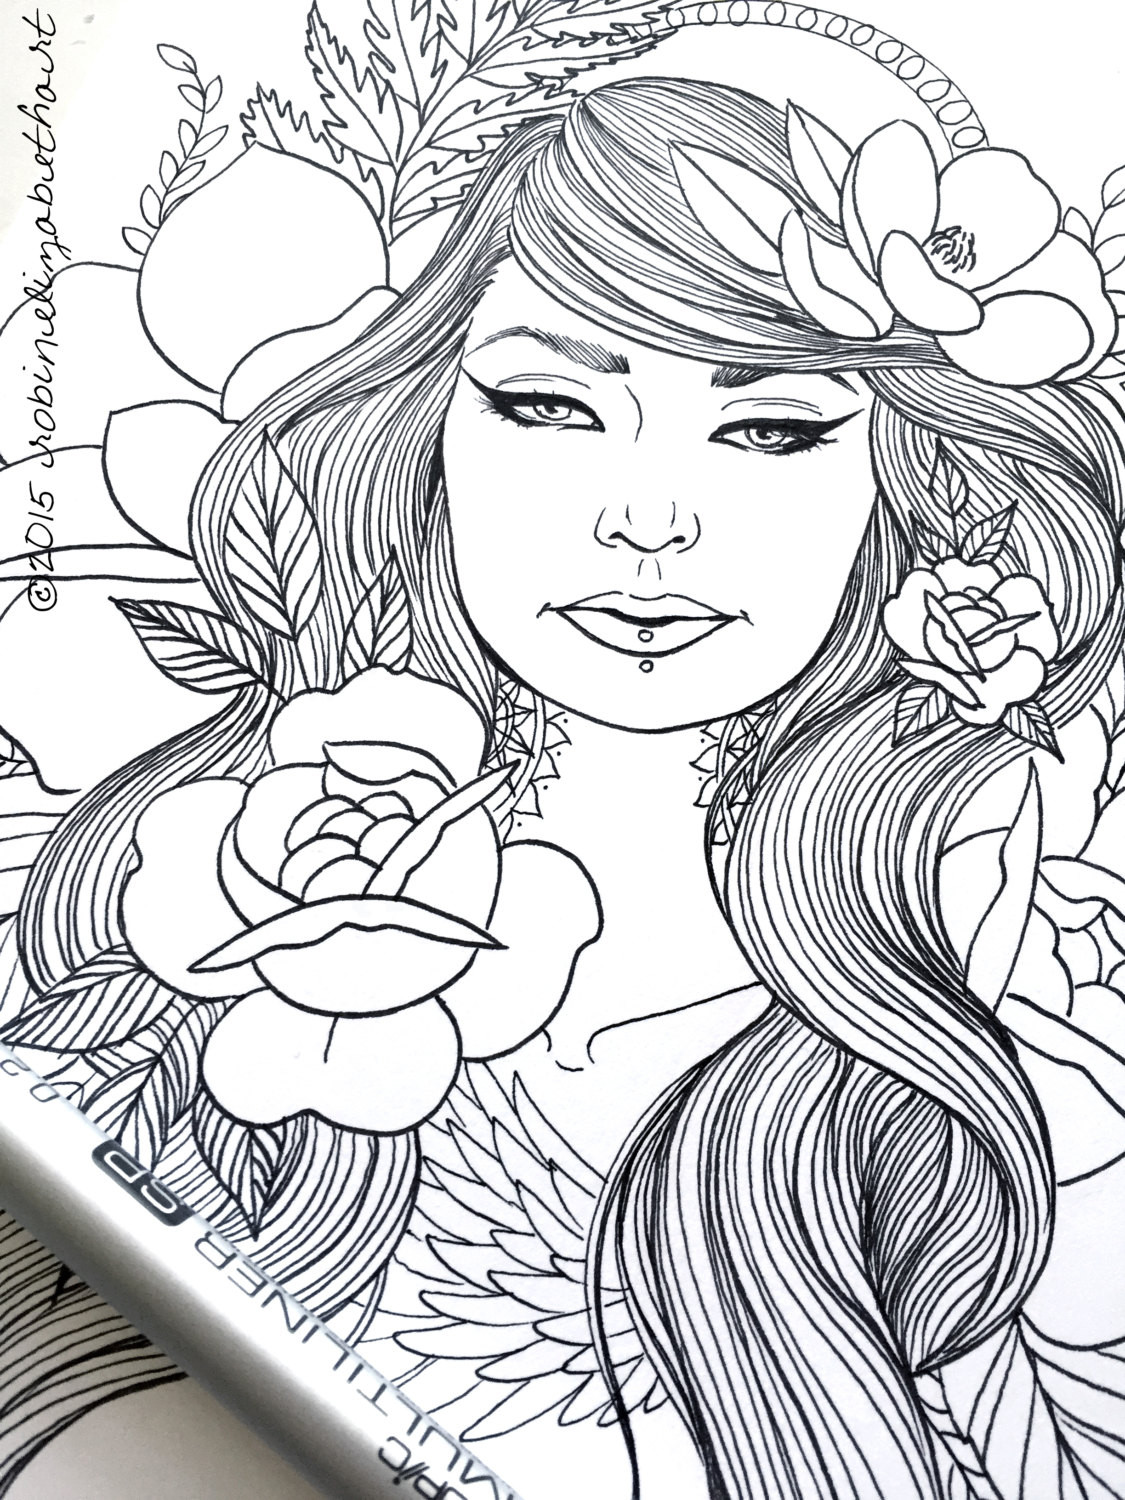 Coloring Pages Of Girls For Adults
 Girls with Tattoos Pack Adult Coloring Pages Magnolias